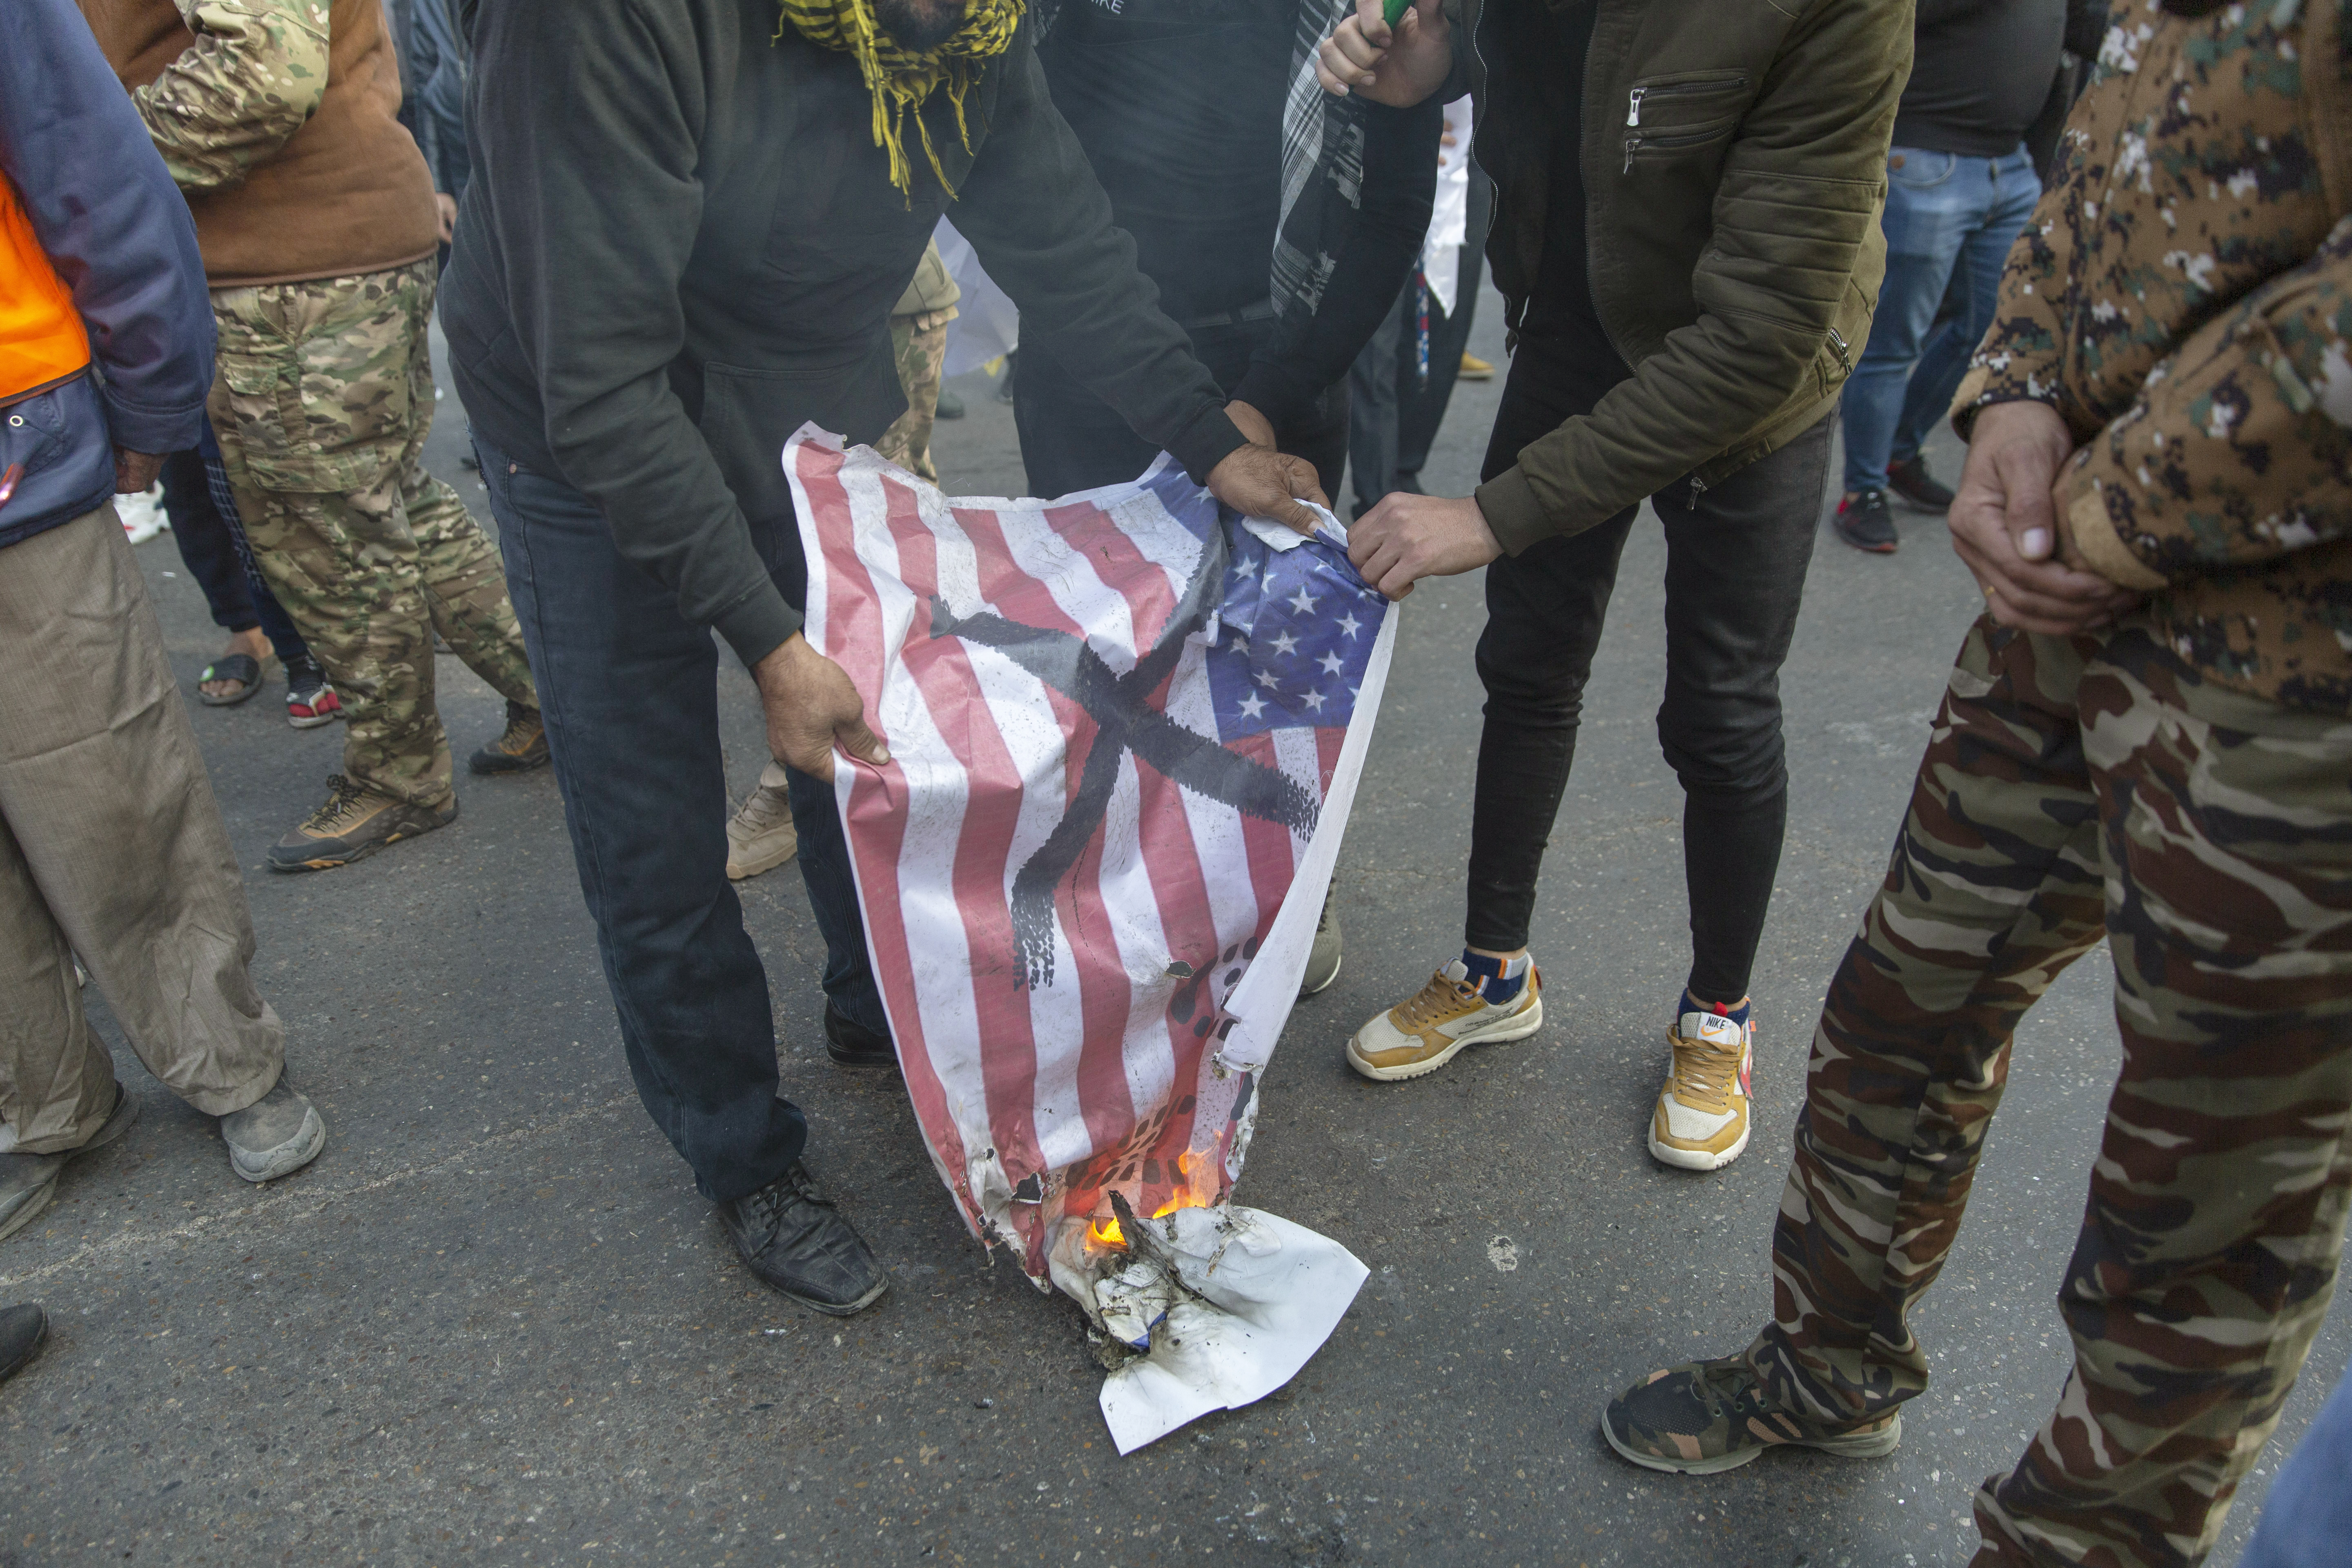 Mourners burn a U.S. flag during the funeral of Iran's top general Qassem Soleimani and Abu Mahdi al-Muhandis, deputy commander of Iran-backed militias in Iraq known as the Popular Mobilization Forces, in Baghdad, Iraq, Saturday, Jan. 4, 2020. Thousands of mourners chanting "America is the Great Satan" marched in a funeral procession Saturday through Baghdad for Iran's top general and Iraqi militant leaders, who were killed in a U.S. airstrike. (AP Photo/Nasser Nasser)